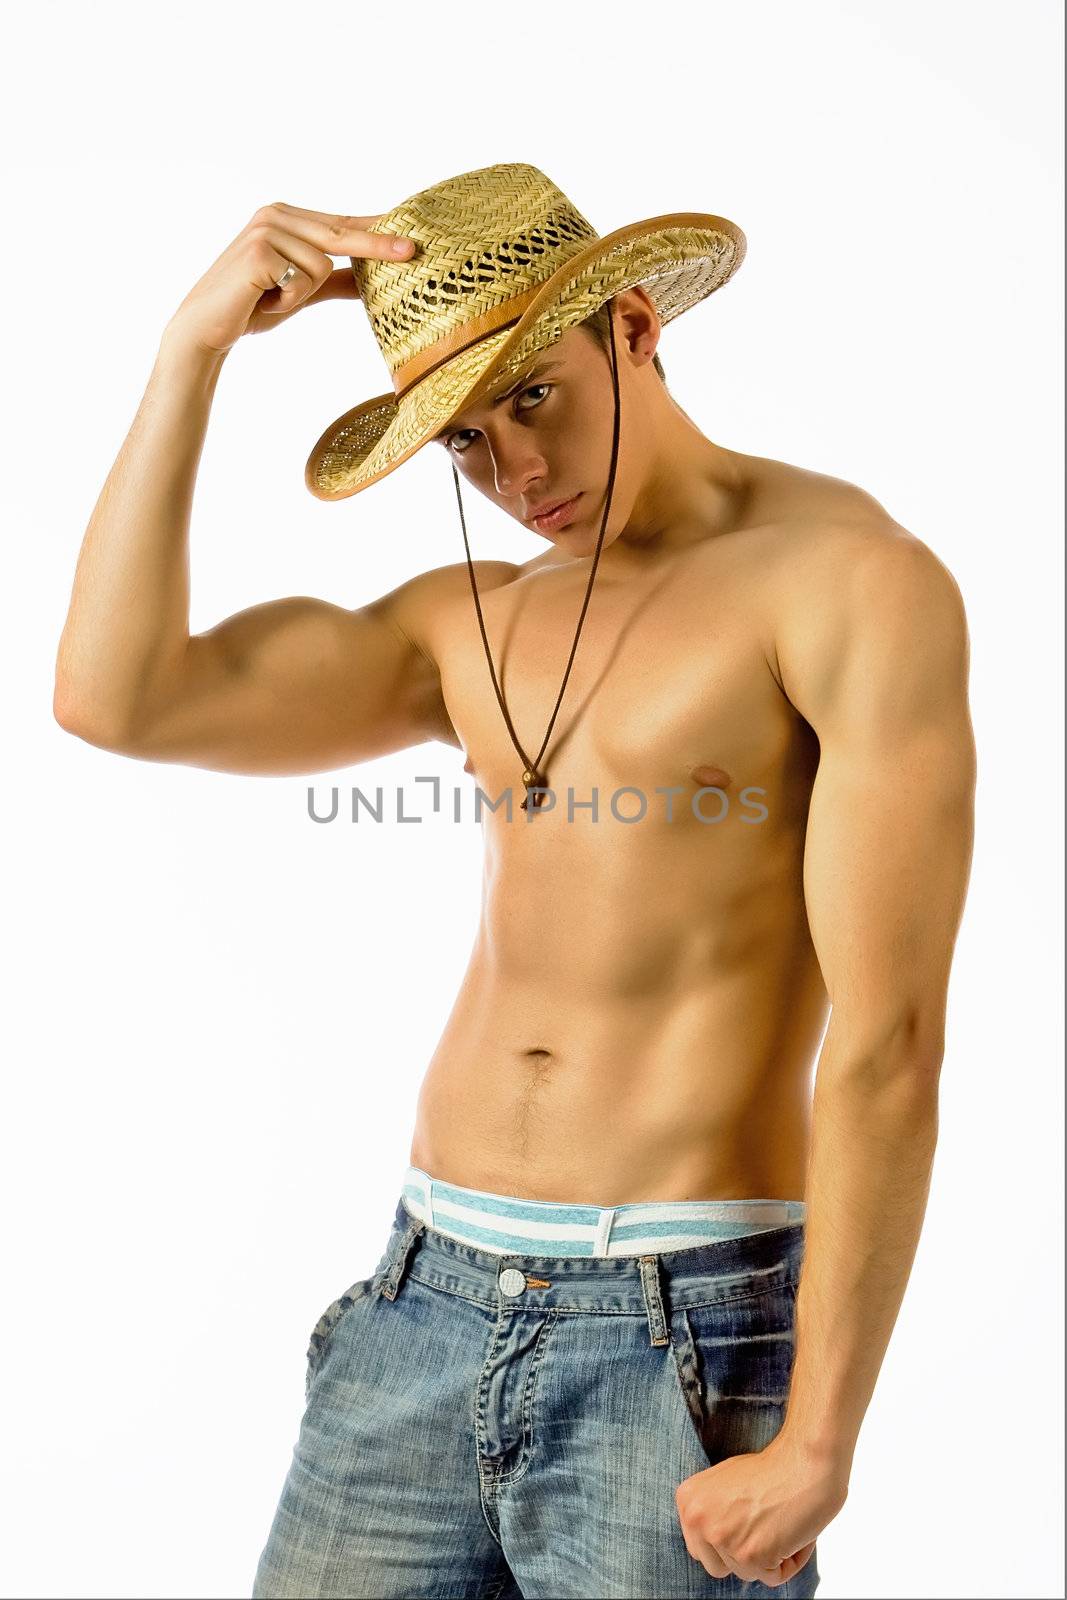 The young man in a straw hat by MIL